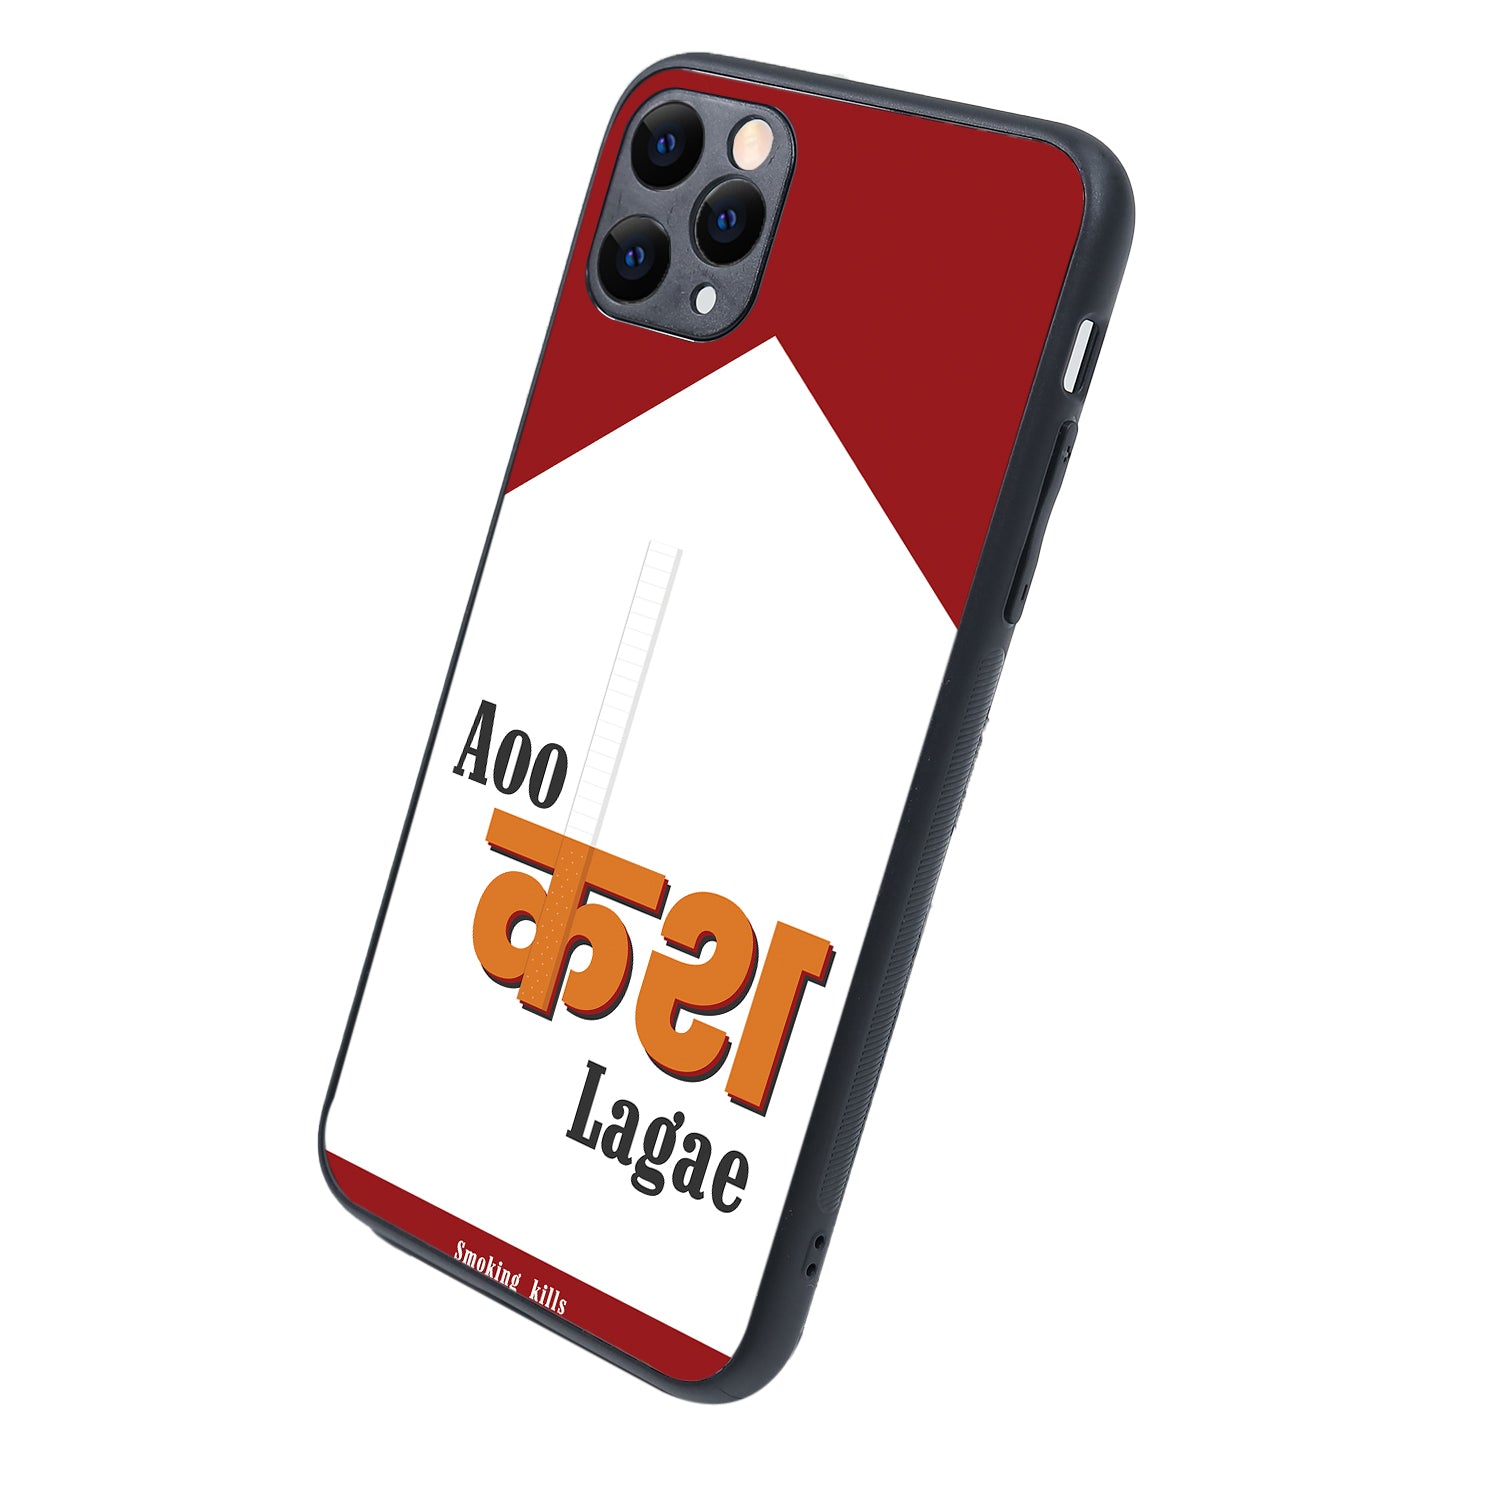 Aao Kash Lagaye Motivational Quotes iPhone 11 Pro Max Case